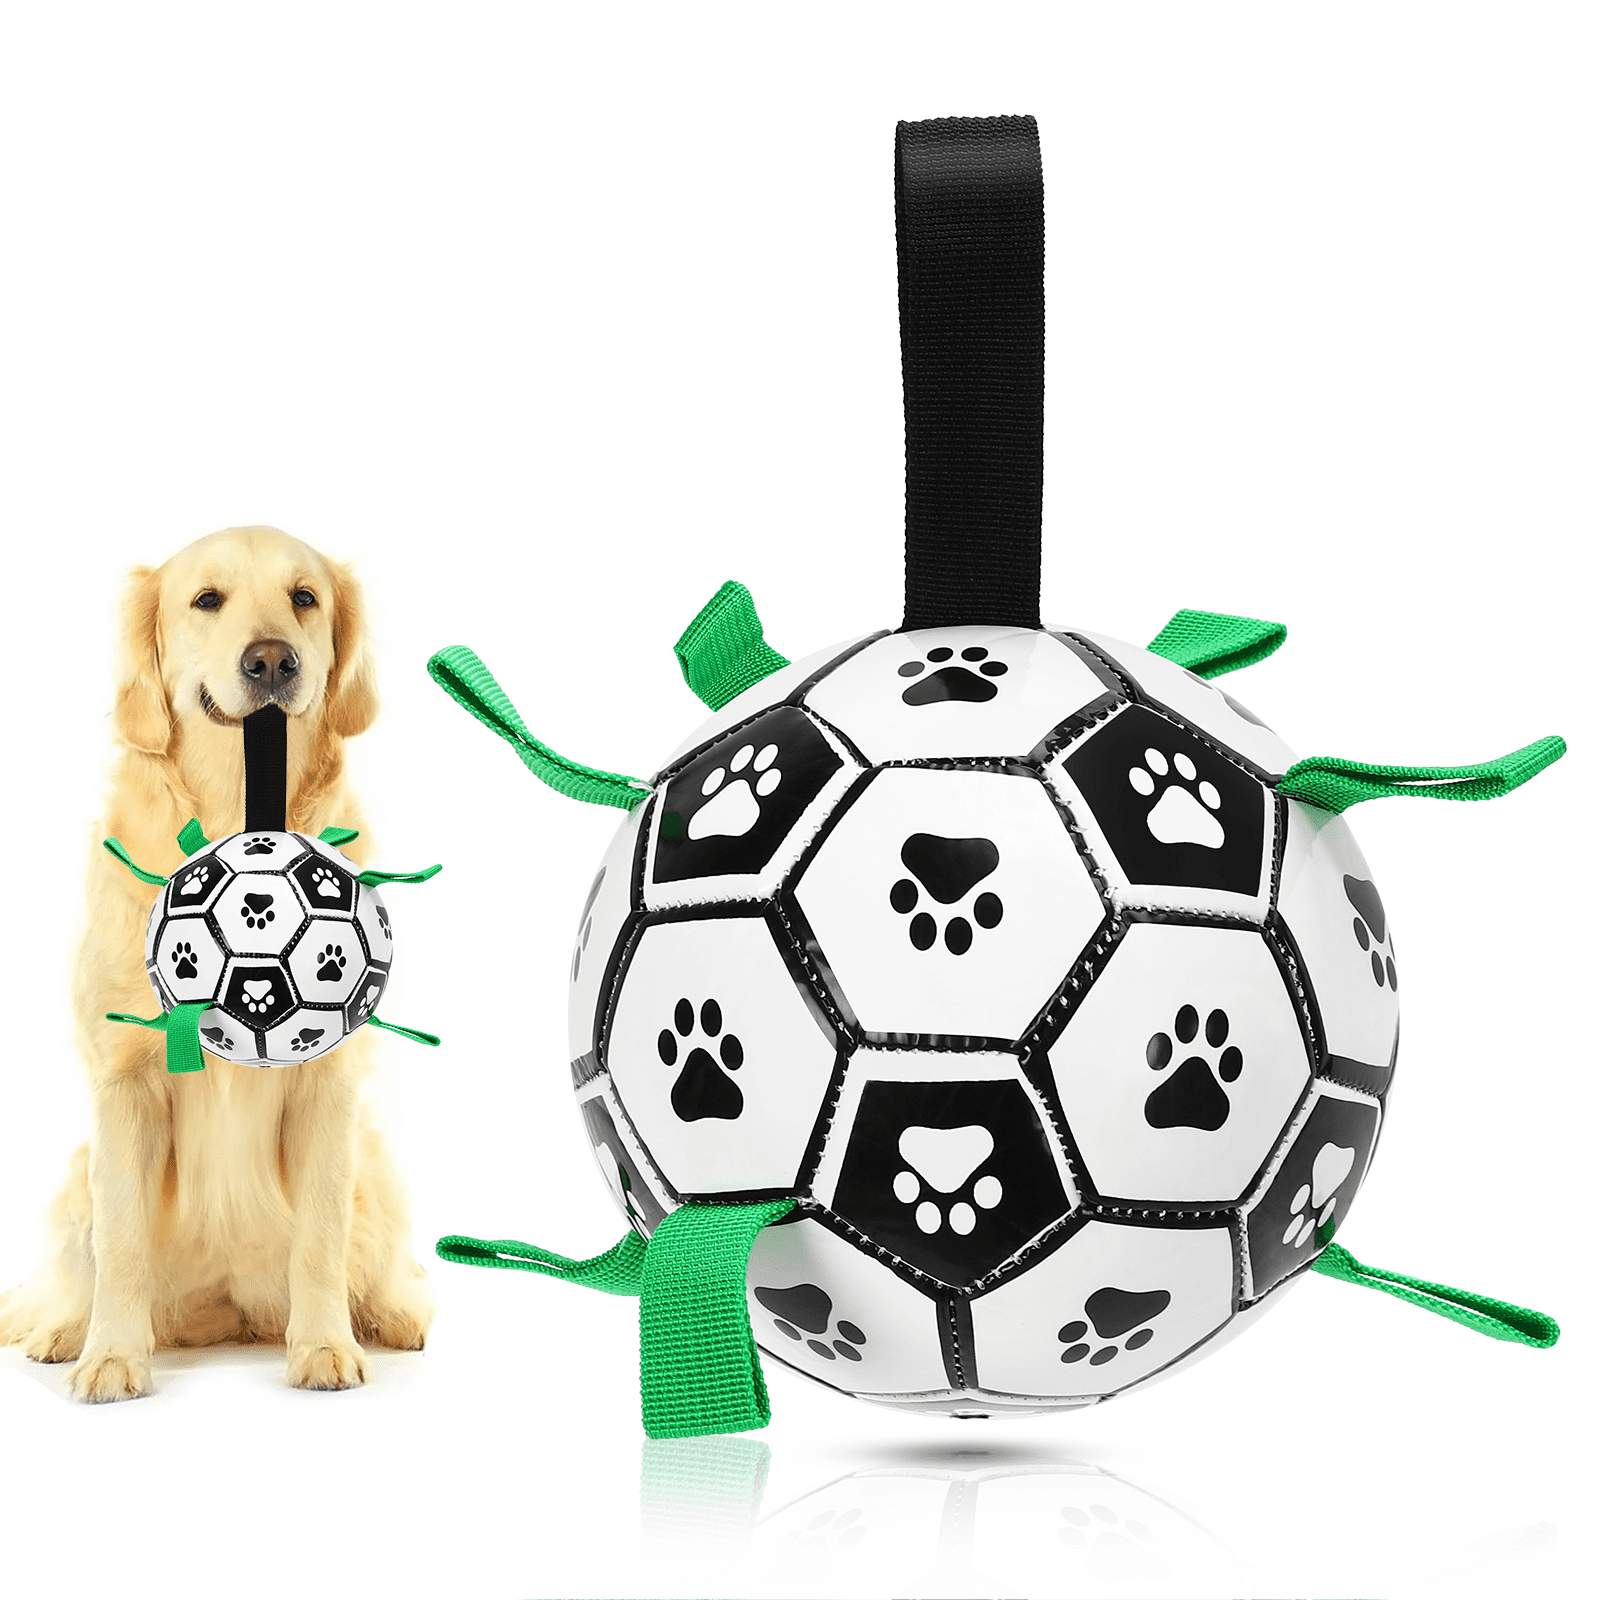 Buy QDAN Dog Toys Soccer Ball with Straps,Interactive Dog Toys for Tug of  War,Puppy Birthday Gifts,Dog Tug Toy,Dog Water Toy,Durable Dog Balls for  Medium & Large Dogs-Pink(8 Inch) Online at Low Prices